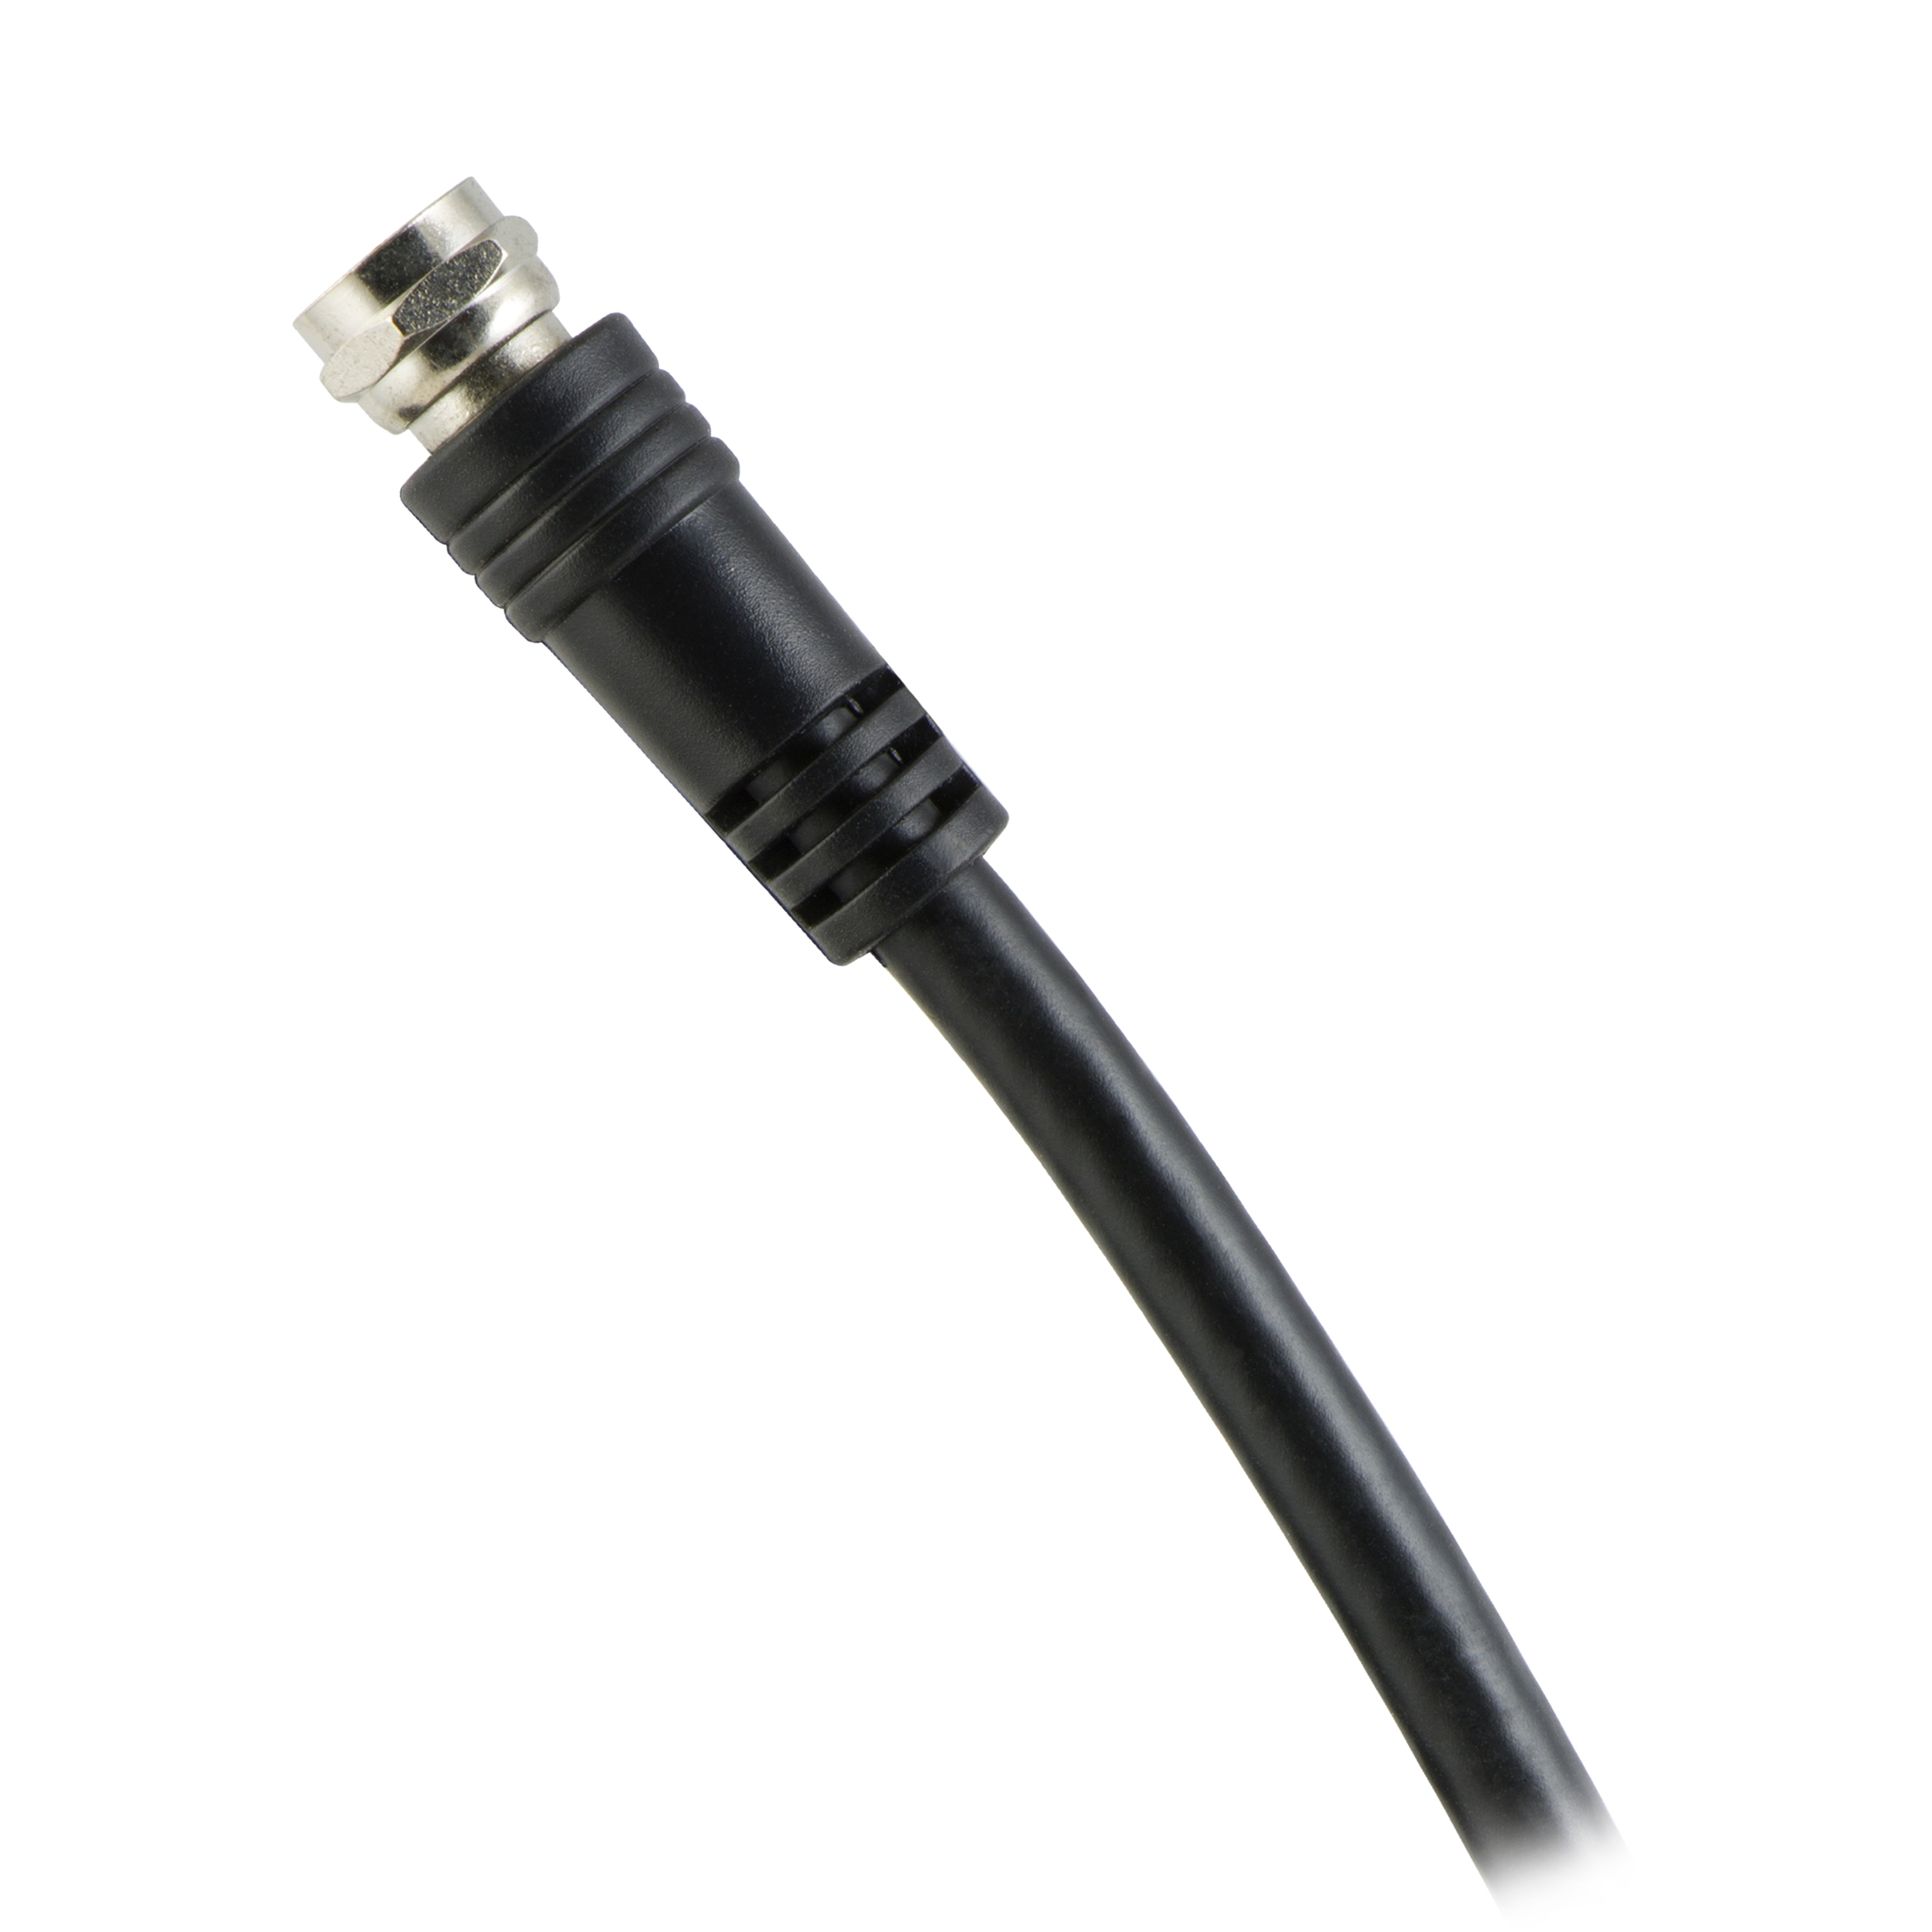 RG6 Coaxial Cable 4ft (BLACK) - MADE IN USA - UL ETL CM CATV Fire retardant  SATELLITE Audio Video Cable with CORNING GILBERT Compression F-Connectors